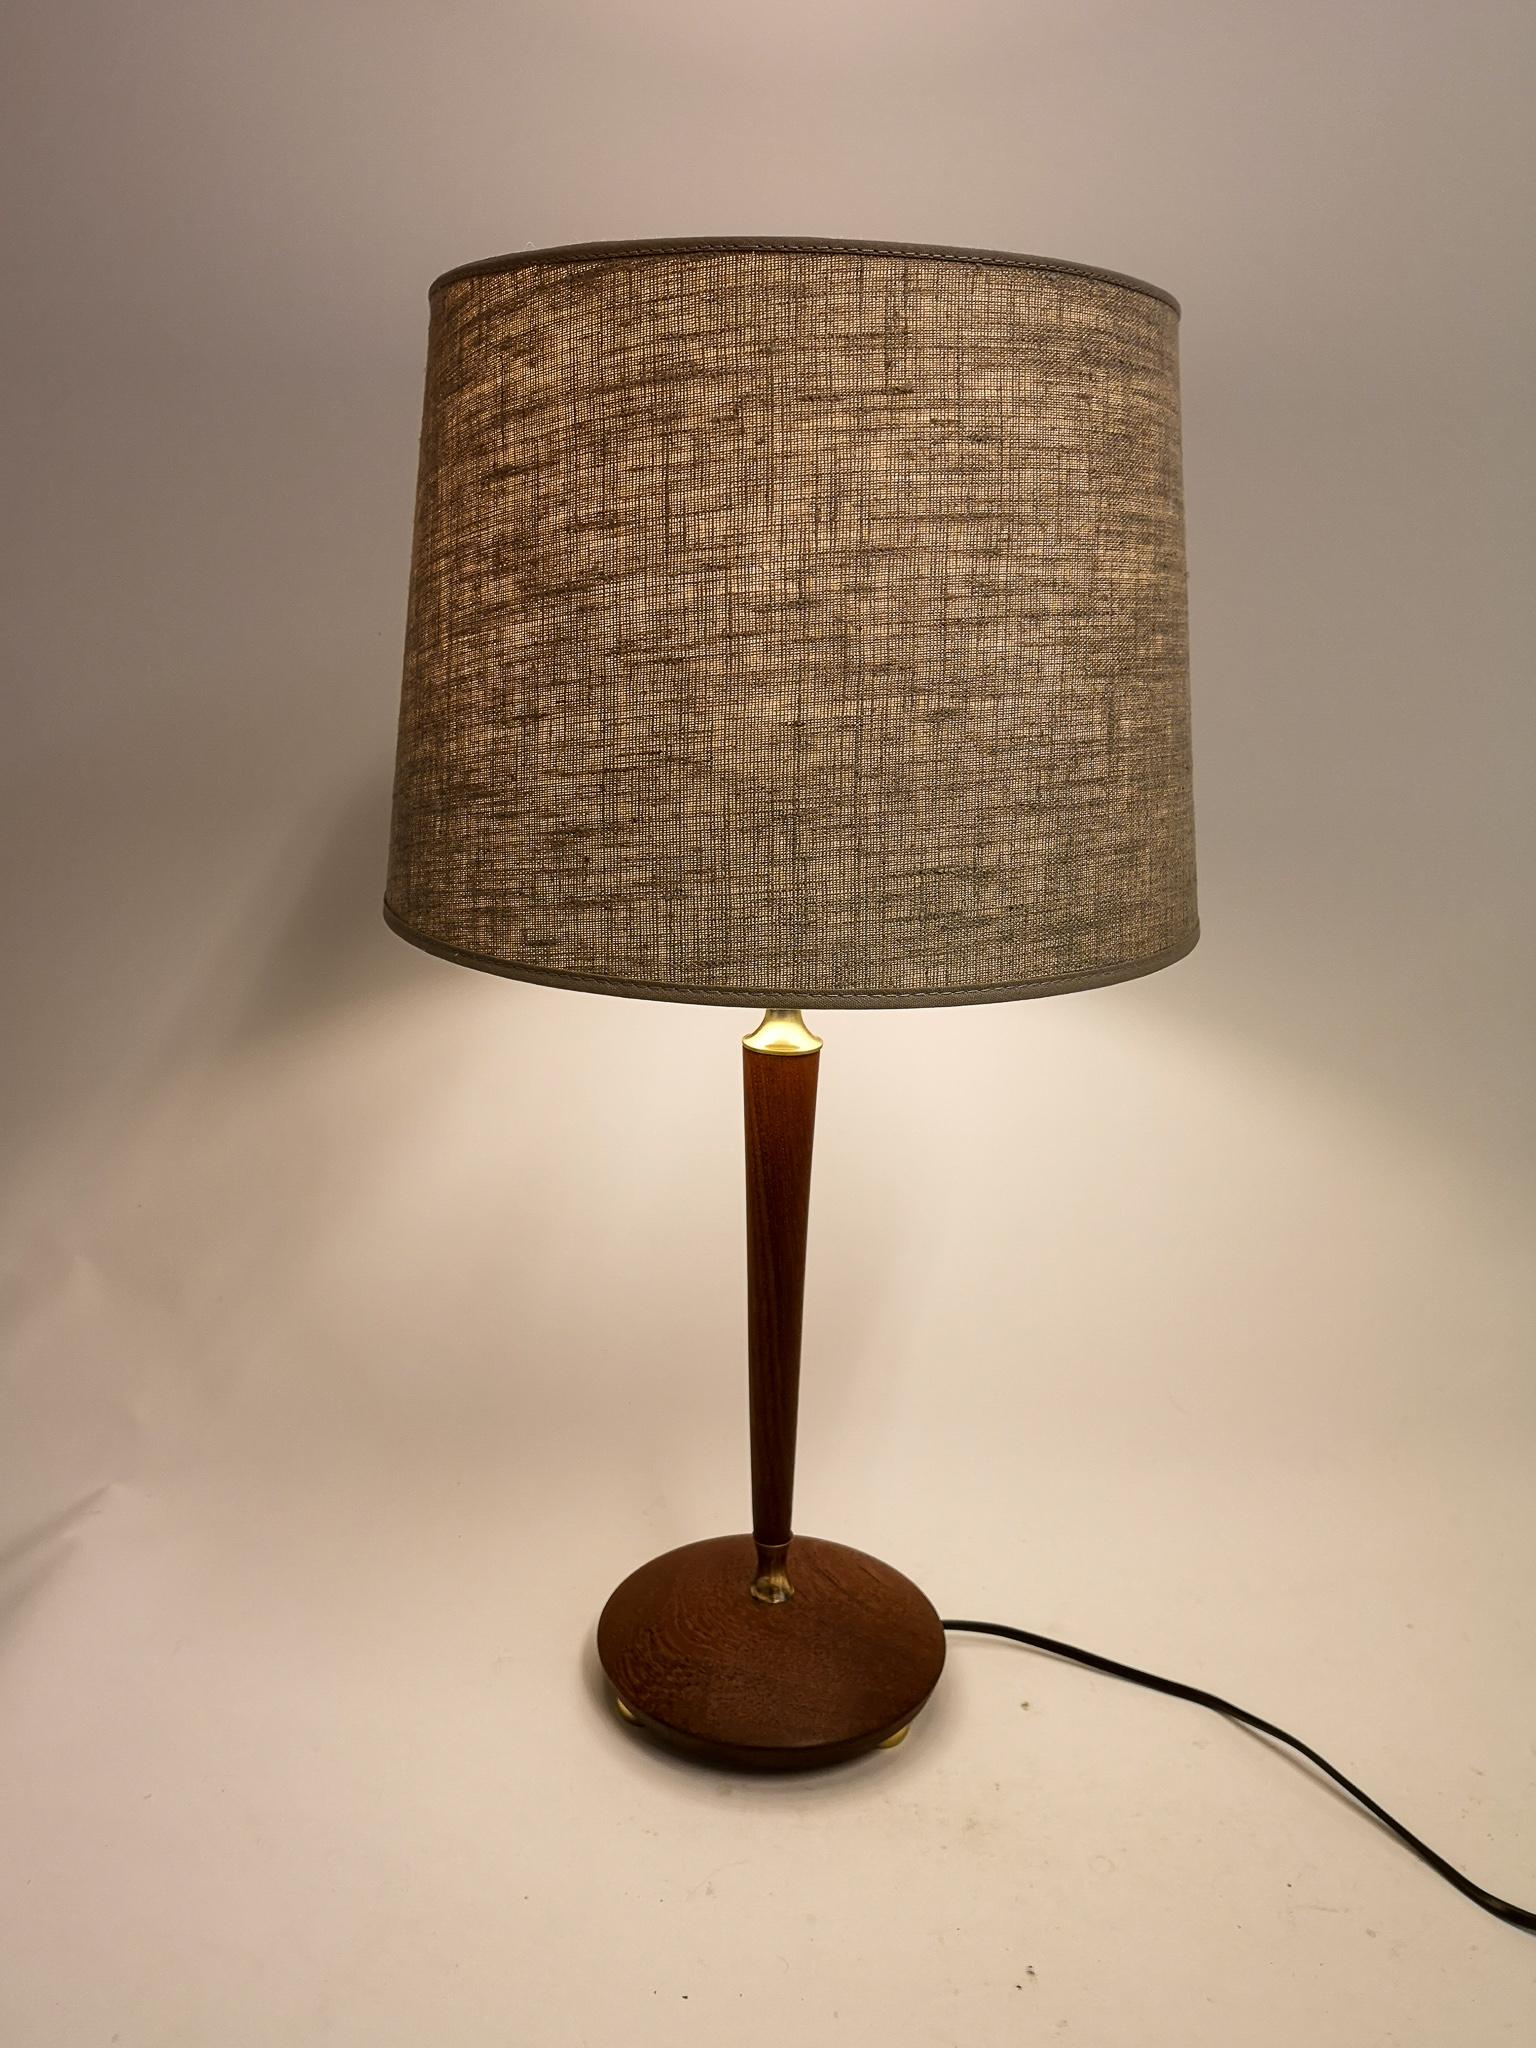 Midcentury Teak and Brass Table Lamp Sweden 1950s In Good Condition For Sale In Hillringsberg, SE